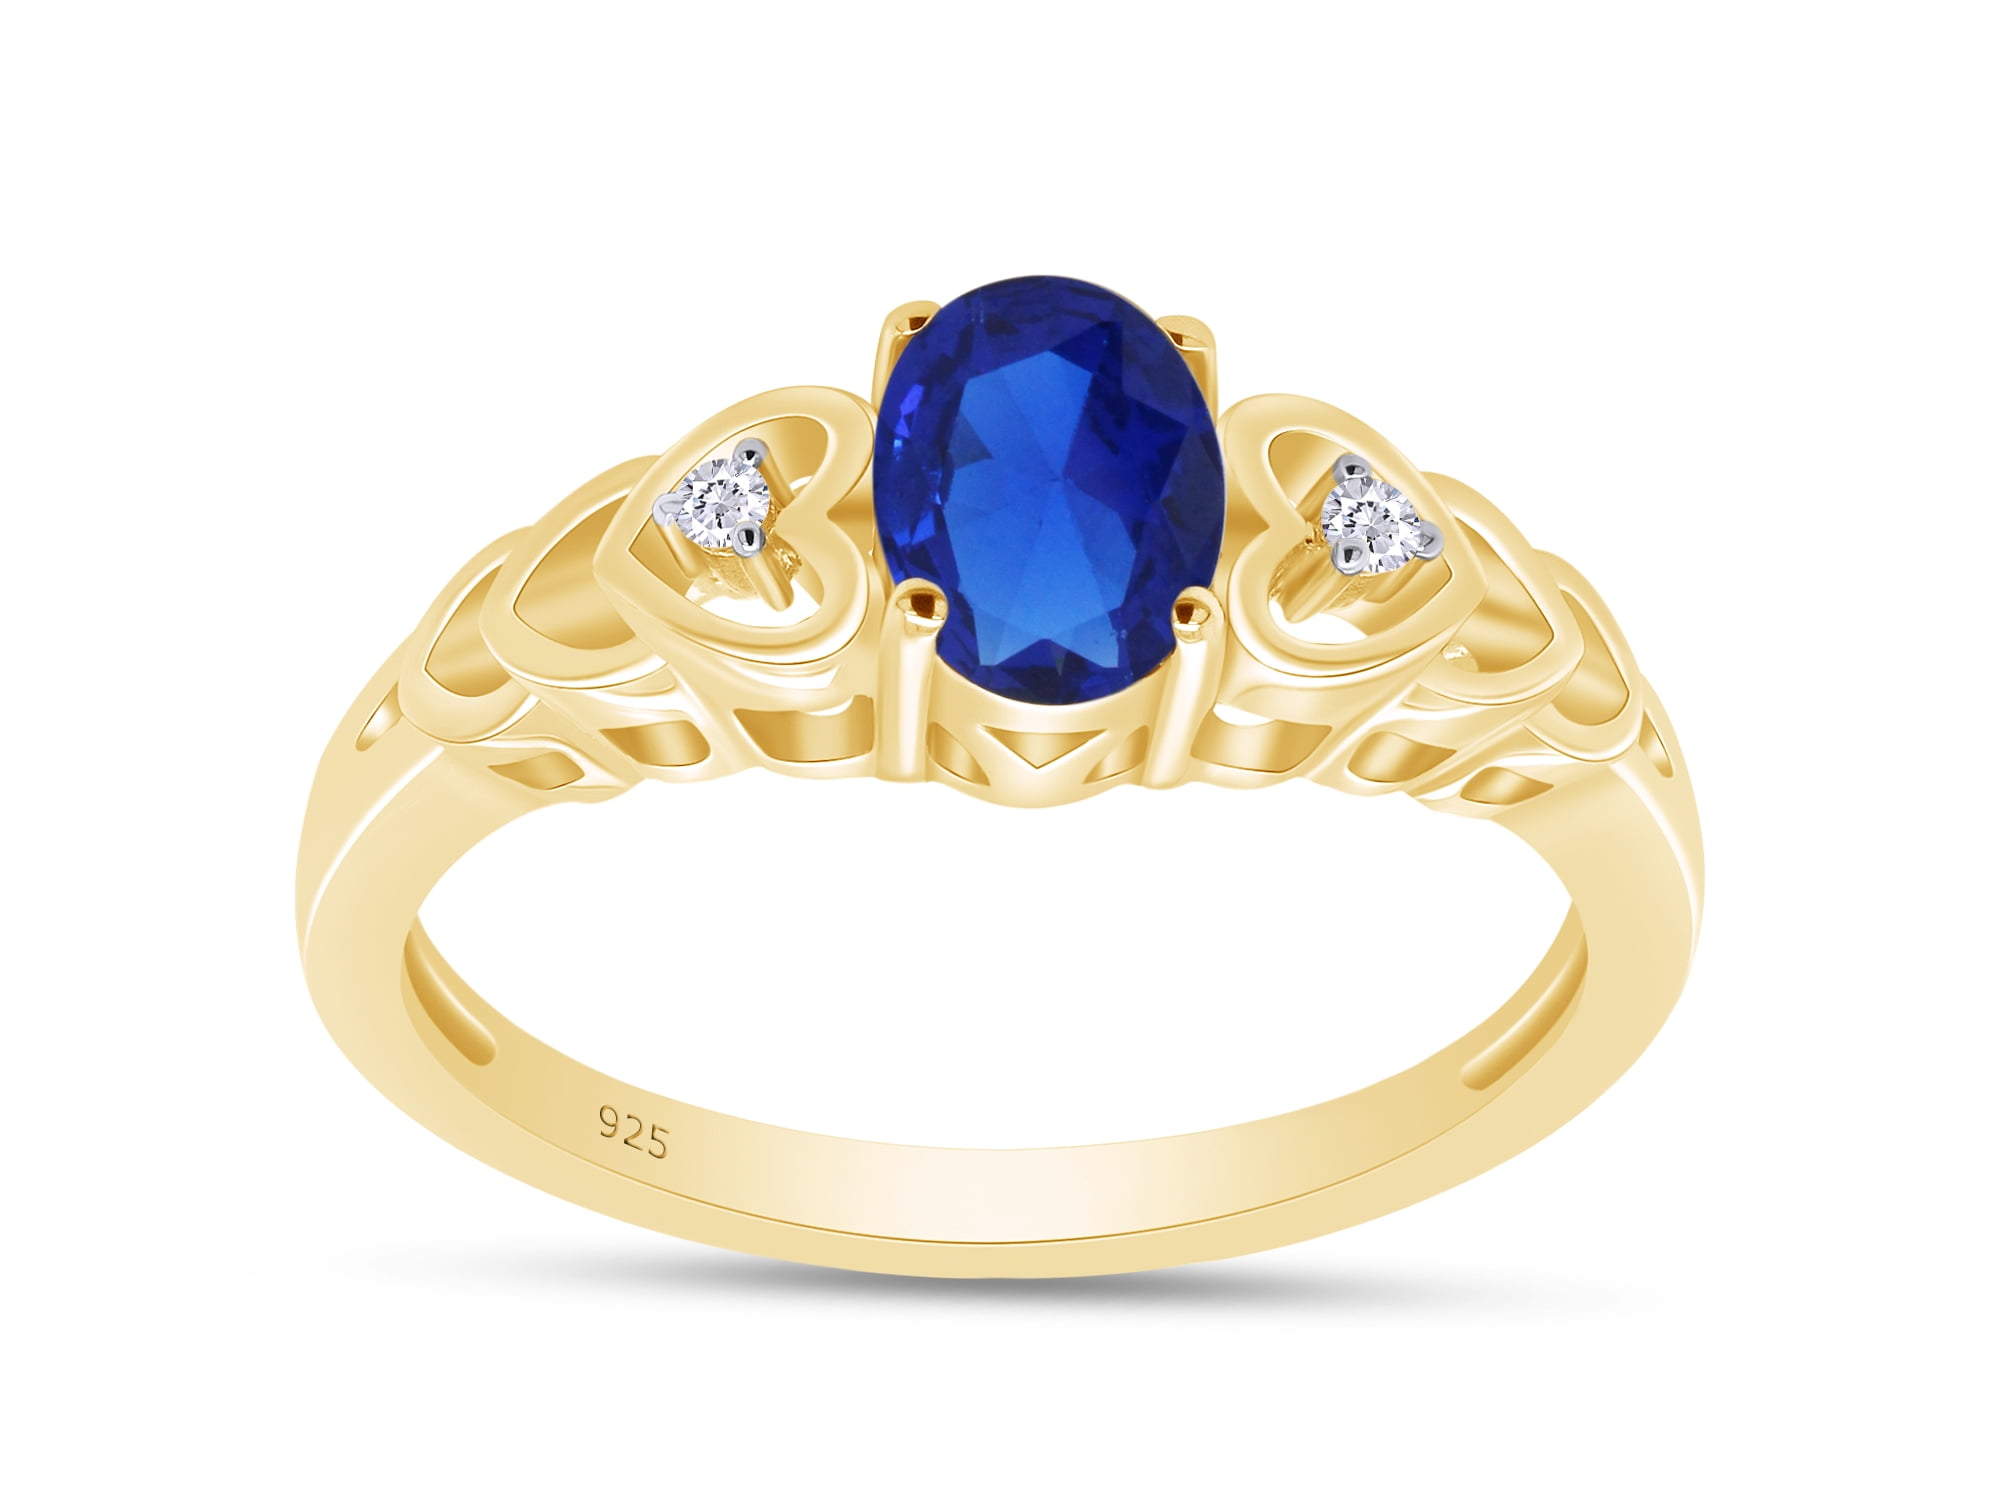 Wishrocks Round Cut Simulated Blue Sapphire Cluster Ring in 14K Yellow Gold Over Sterling Silver 